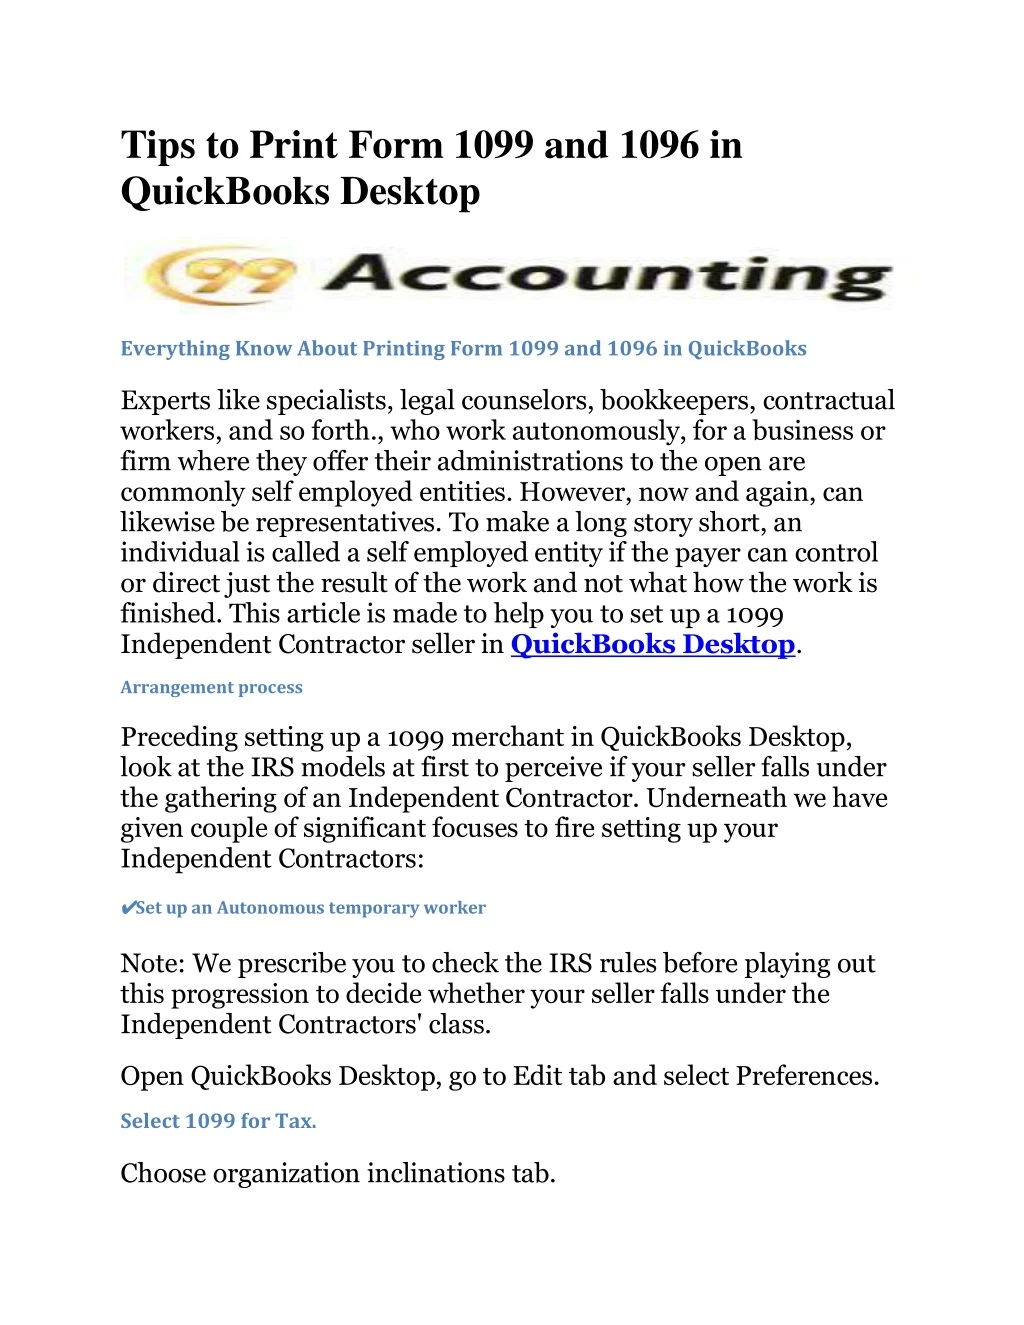 tips to print form 1099 and 1096 in quickbooks